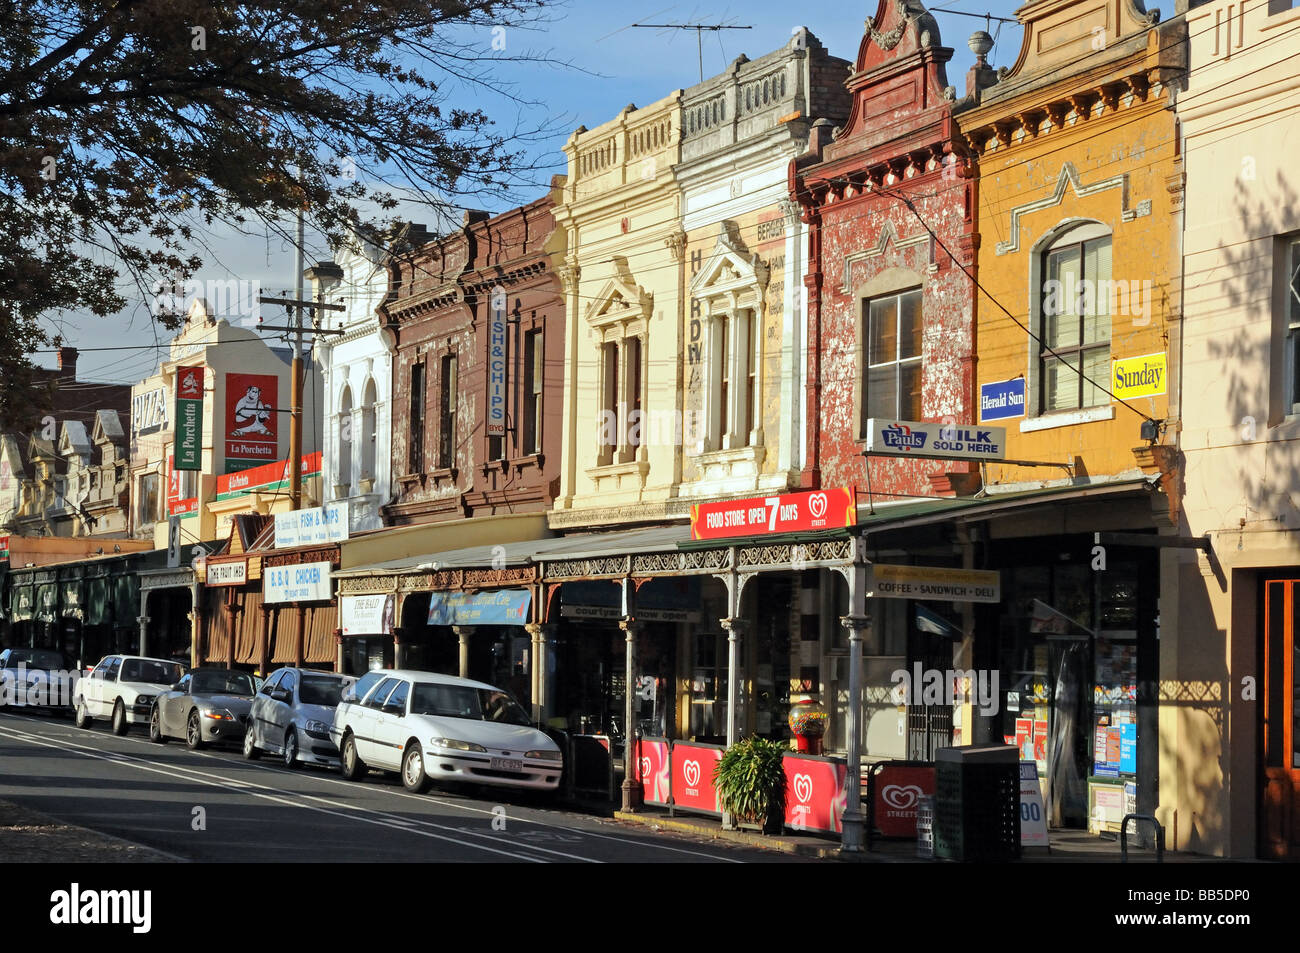 Typical old Victorian style shops Lygon Street Carlton suburb Stock Photo, Royalty Free Image ...